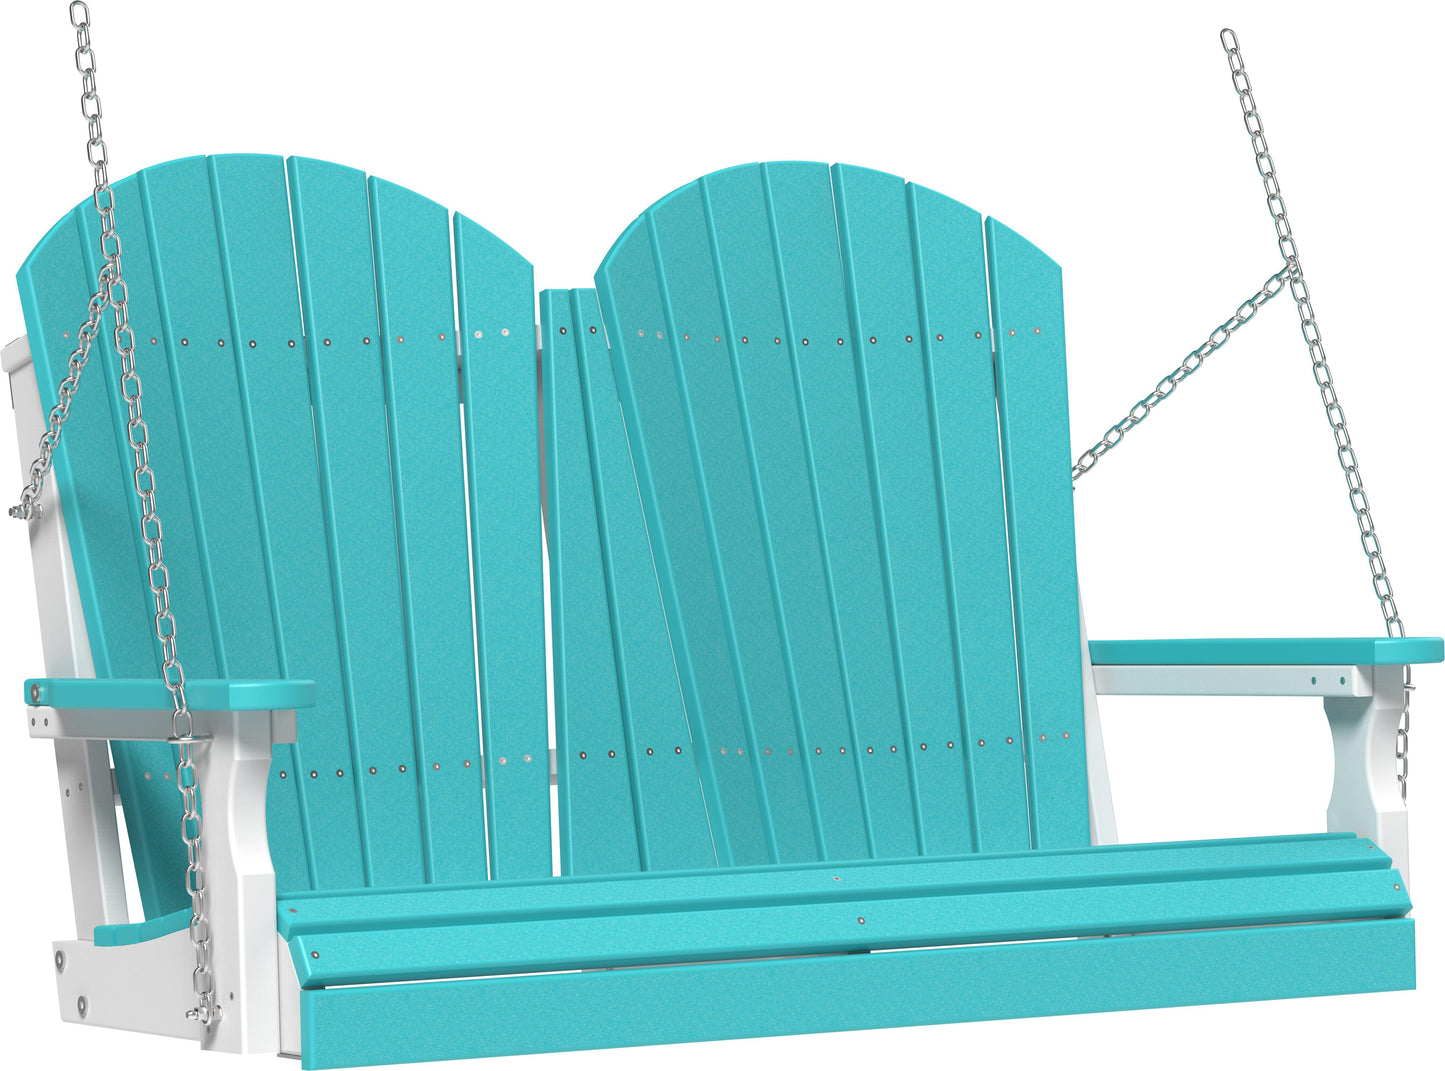 LuxCraft Adirondack 4ft. Recycled Plastic Porch Swing  - LEAD TIME TO SHIP 10 to 12 BUSINESS DAYS